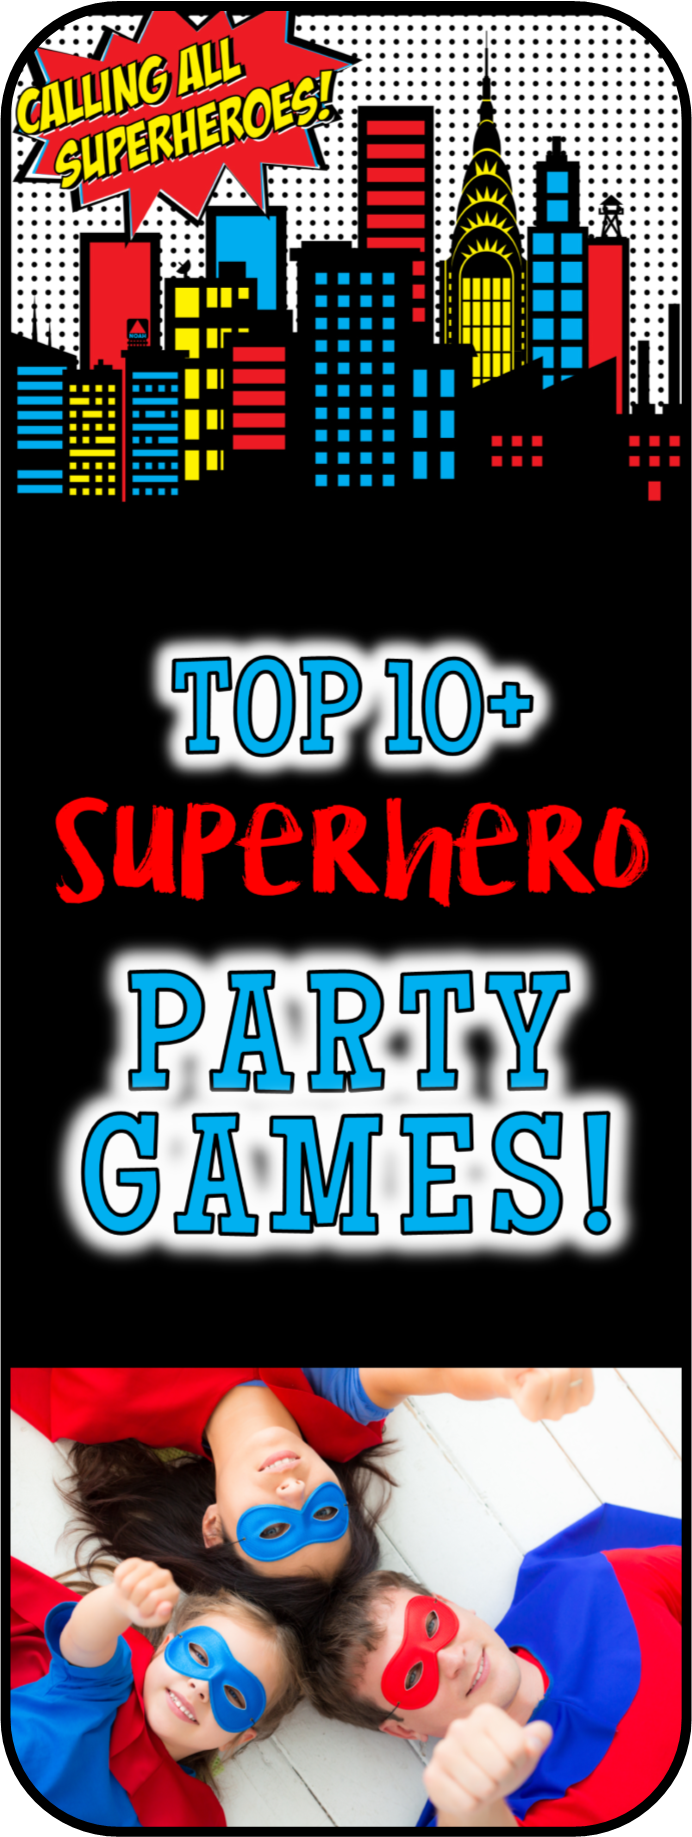 Top Superhero Party Games And Superhero Activities,How To Keep Cats Away From Plants